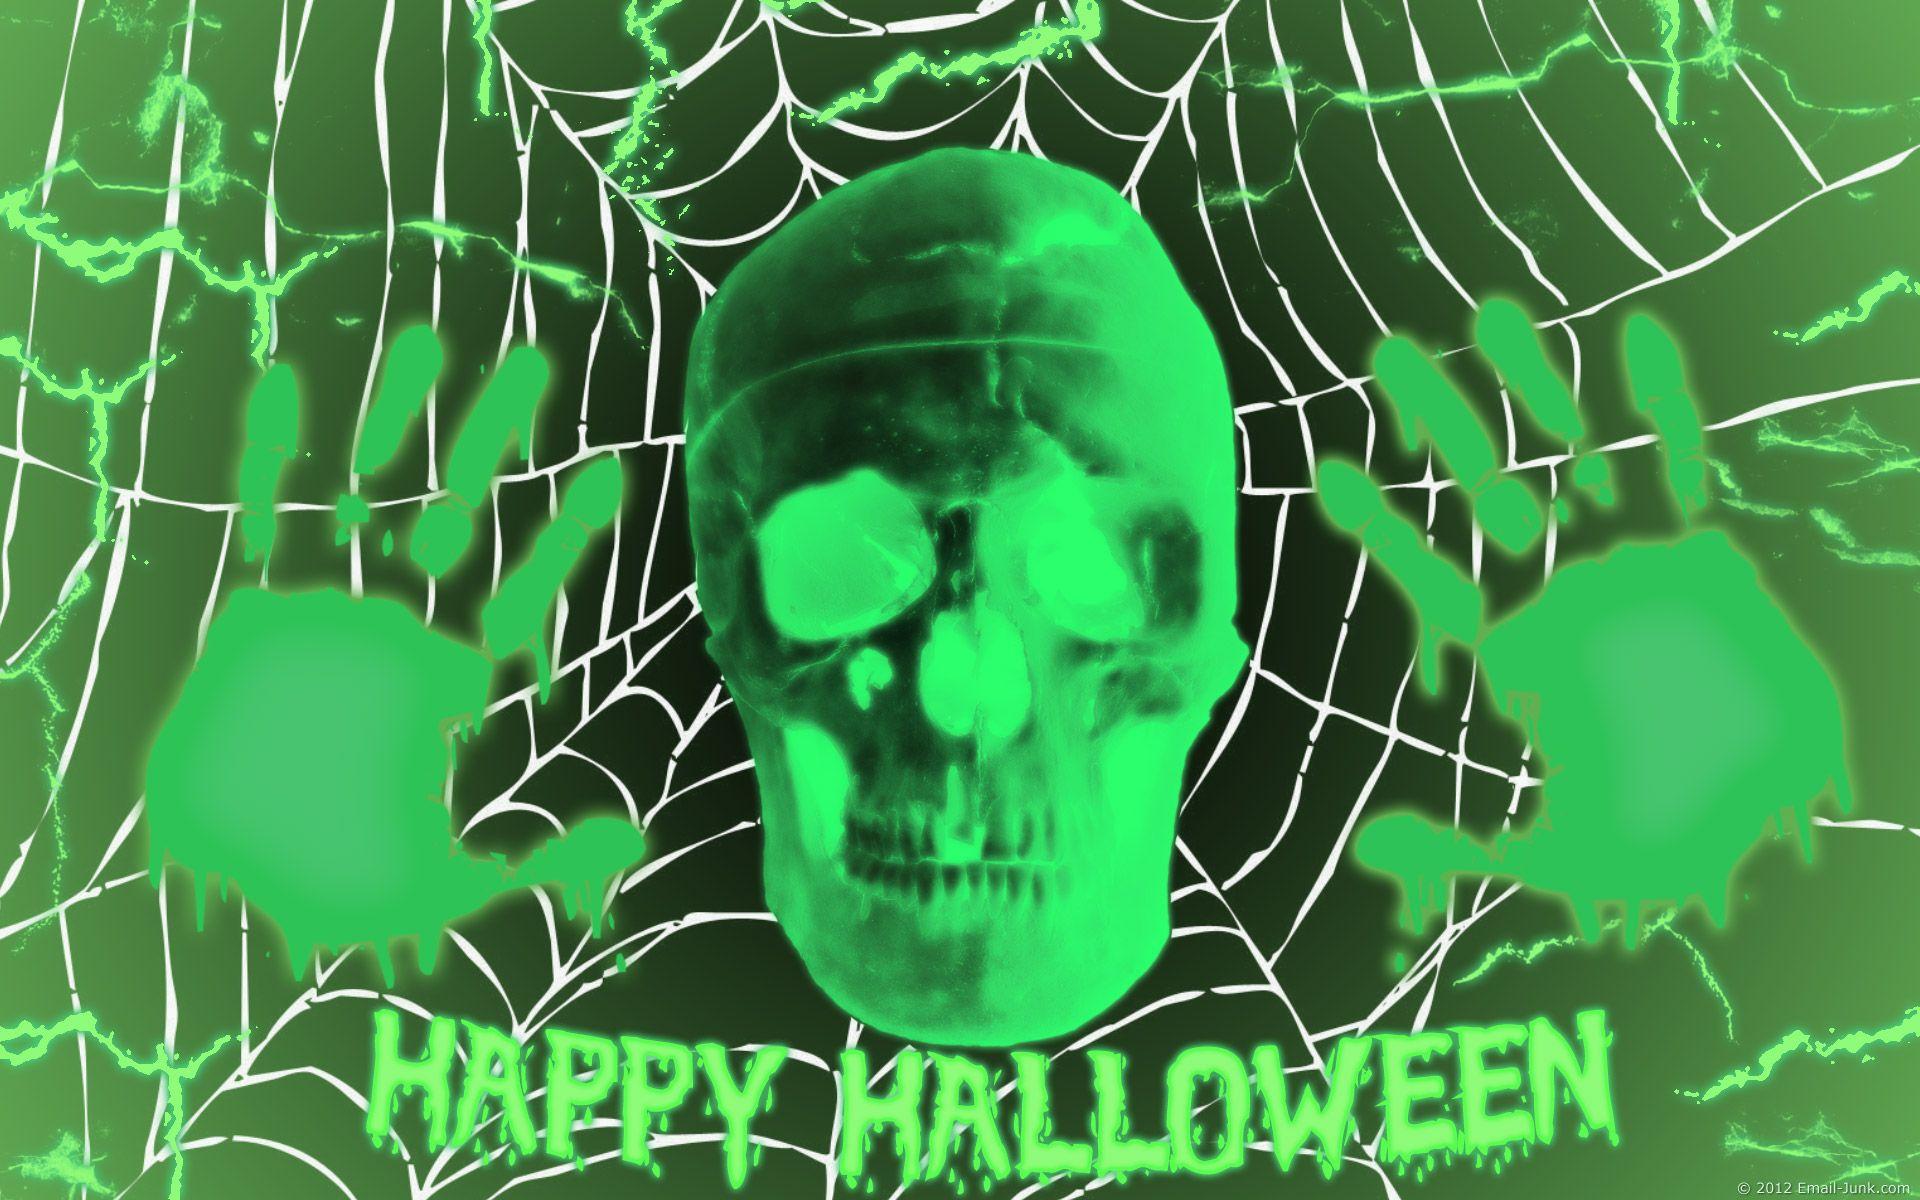 Halloween wallpapers by Email Junk